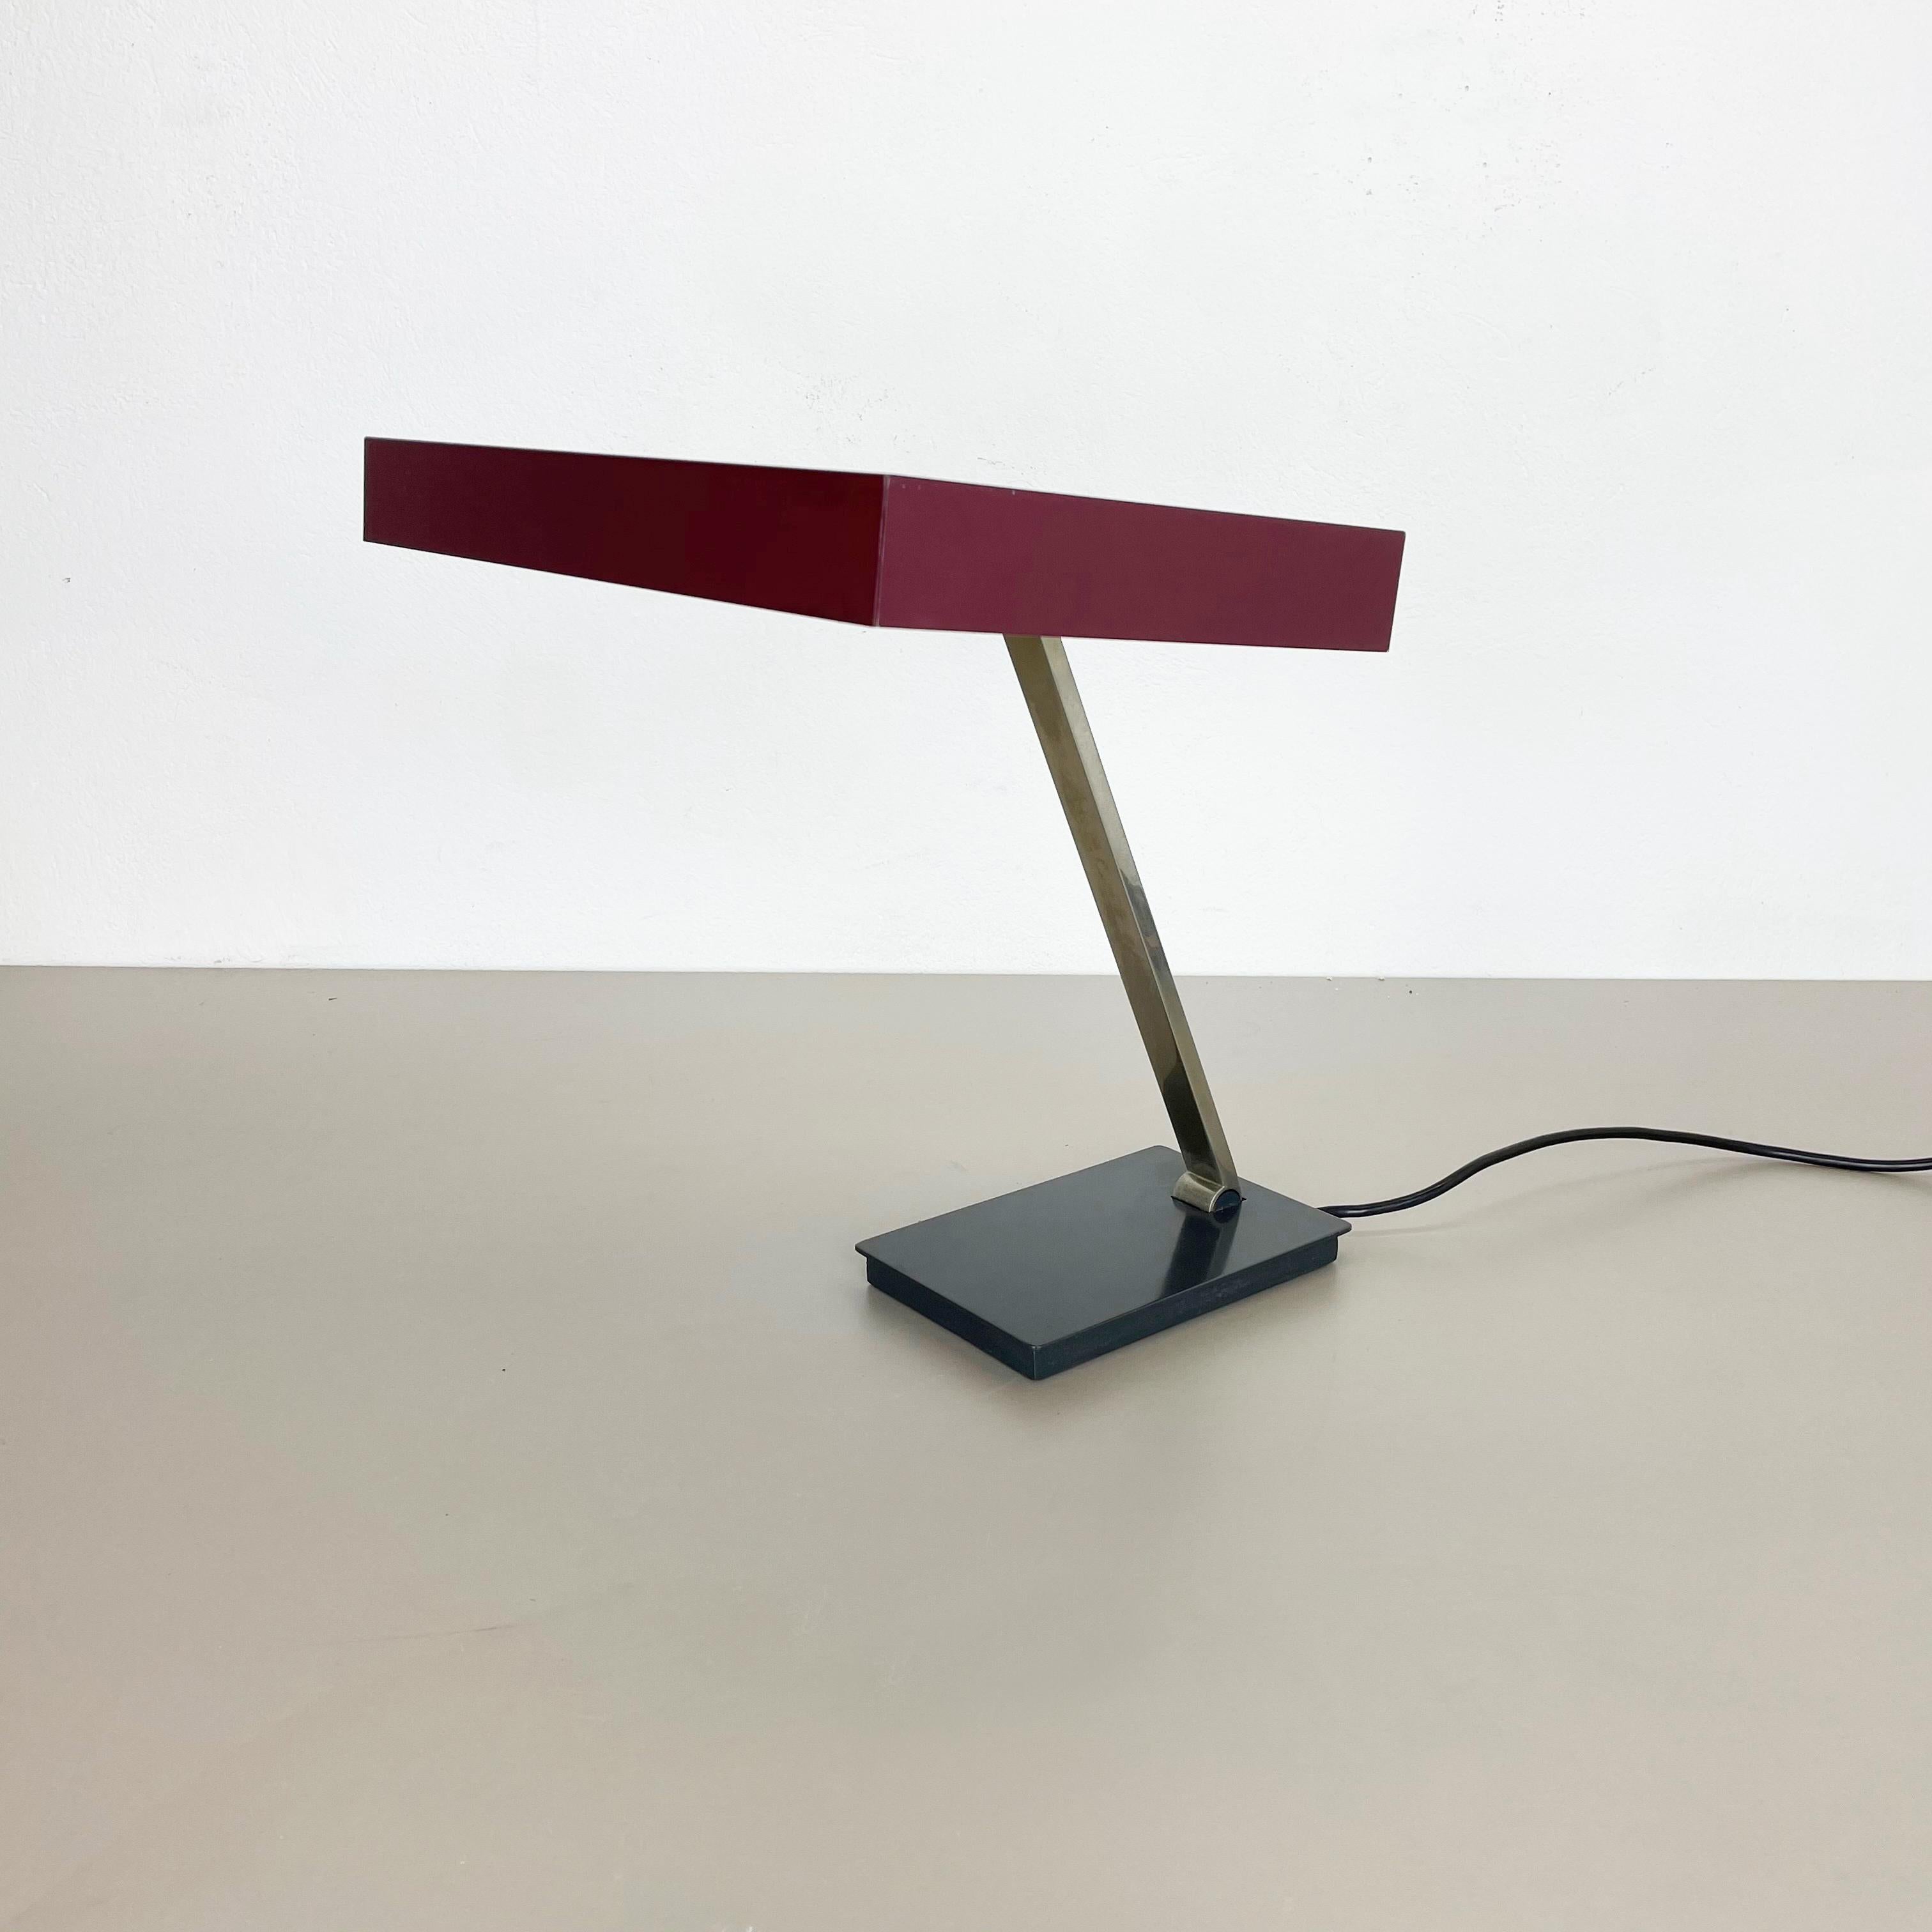 Article:

Table light


Producer:

Kaiser Leuchten, Germany


Origin:

Germany



Age:

1970s






This 1970s table light was made by Kaiser Leuchten in Germany. The light is made of solid metal. The shade has a nice purple